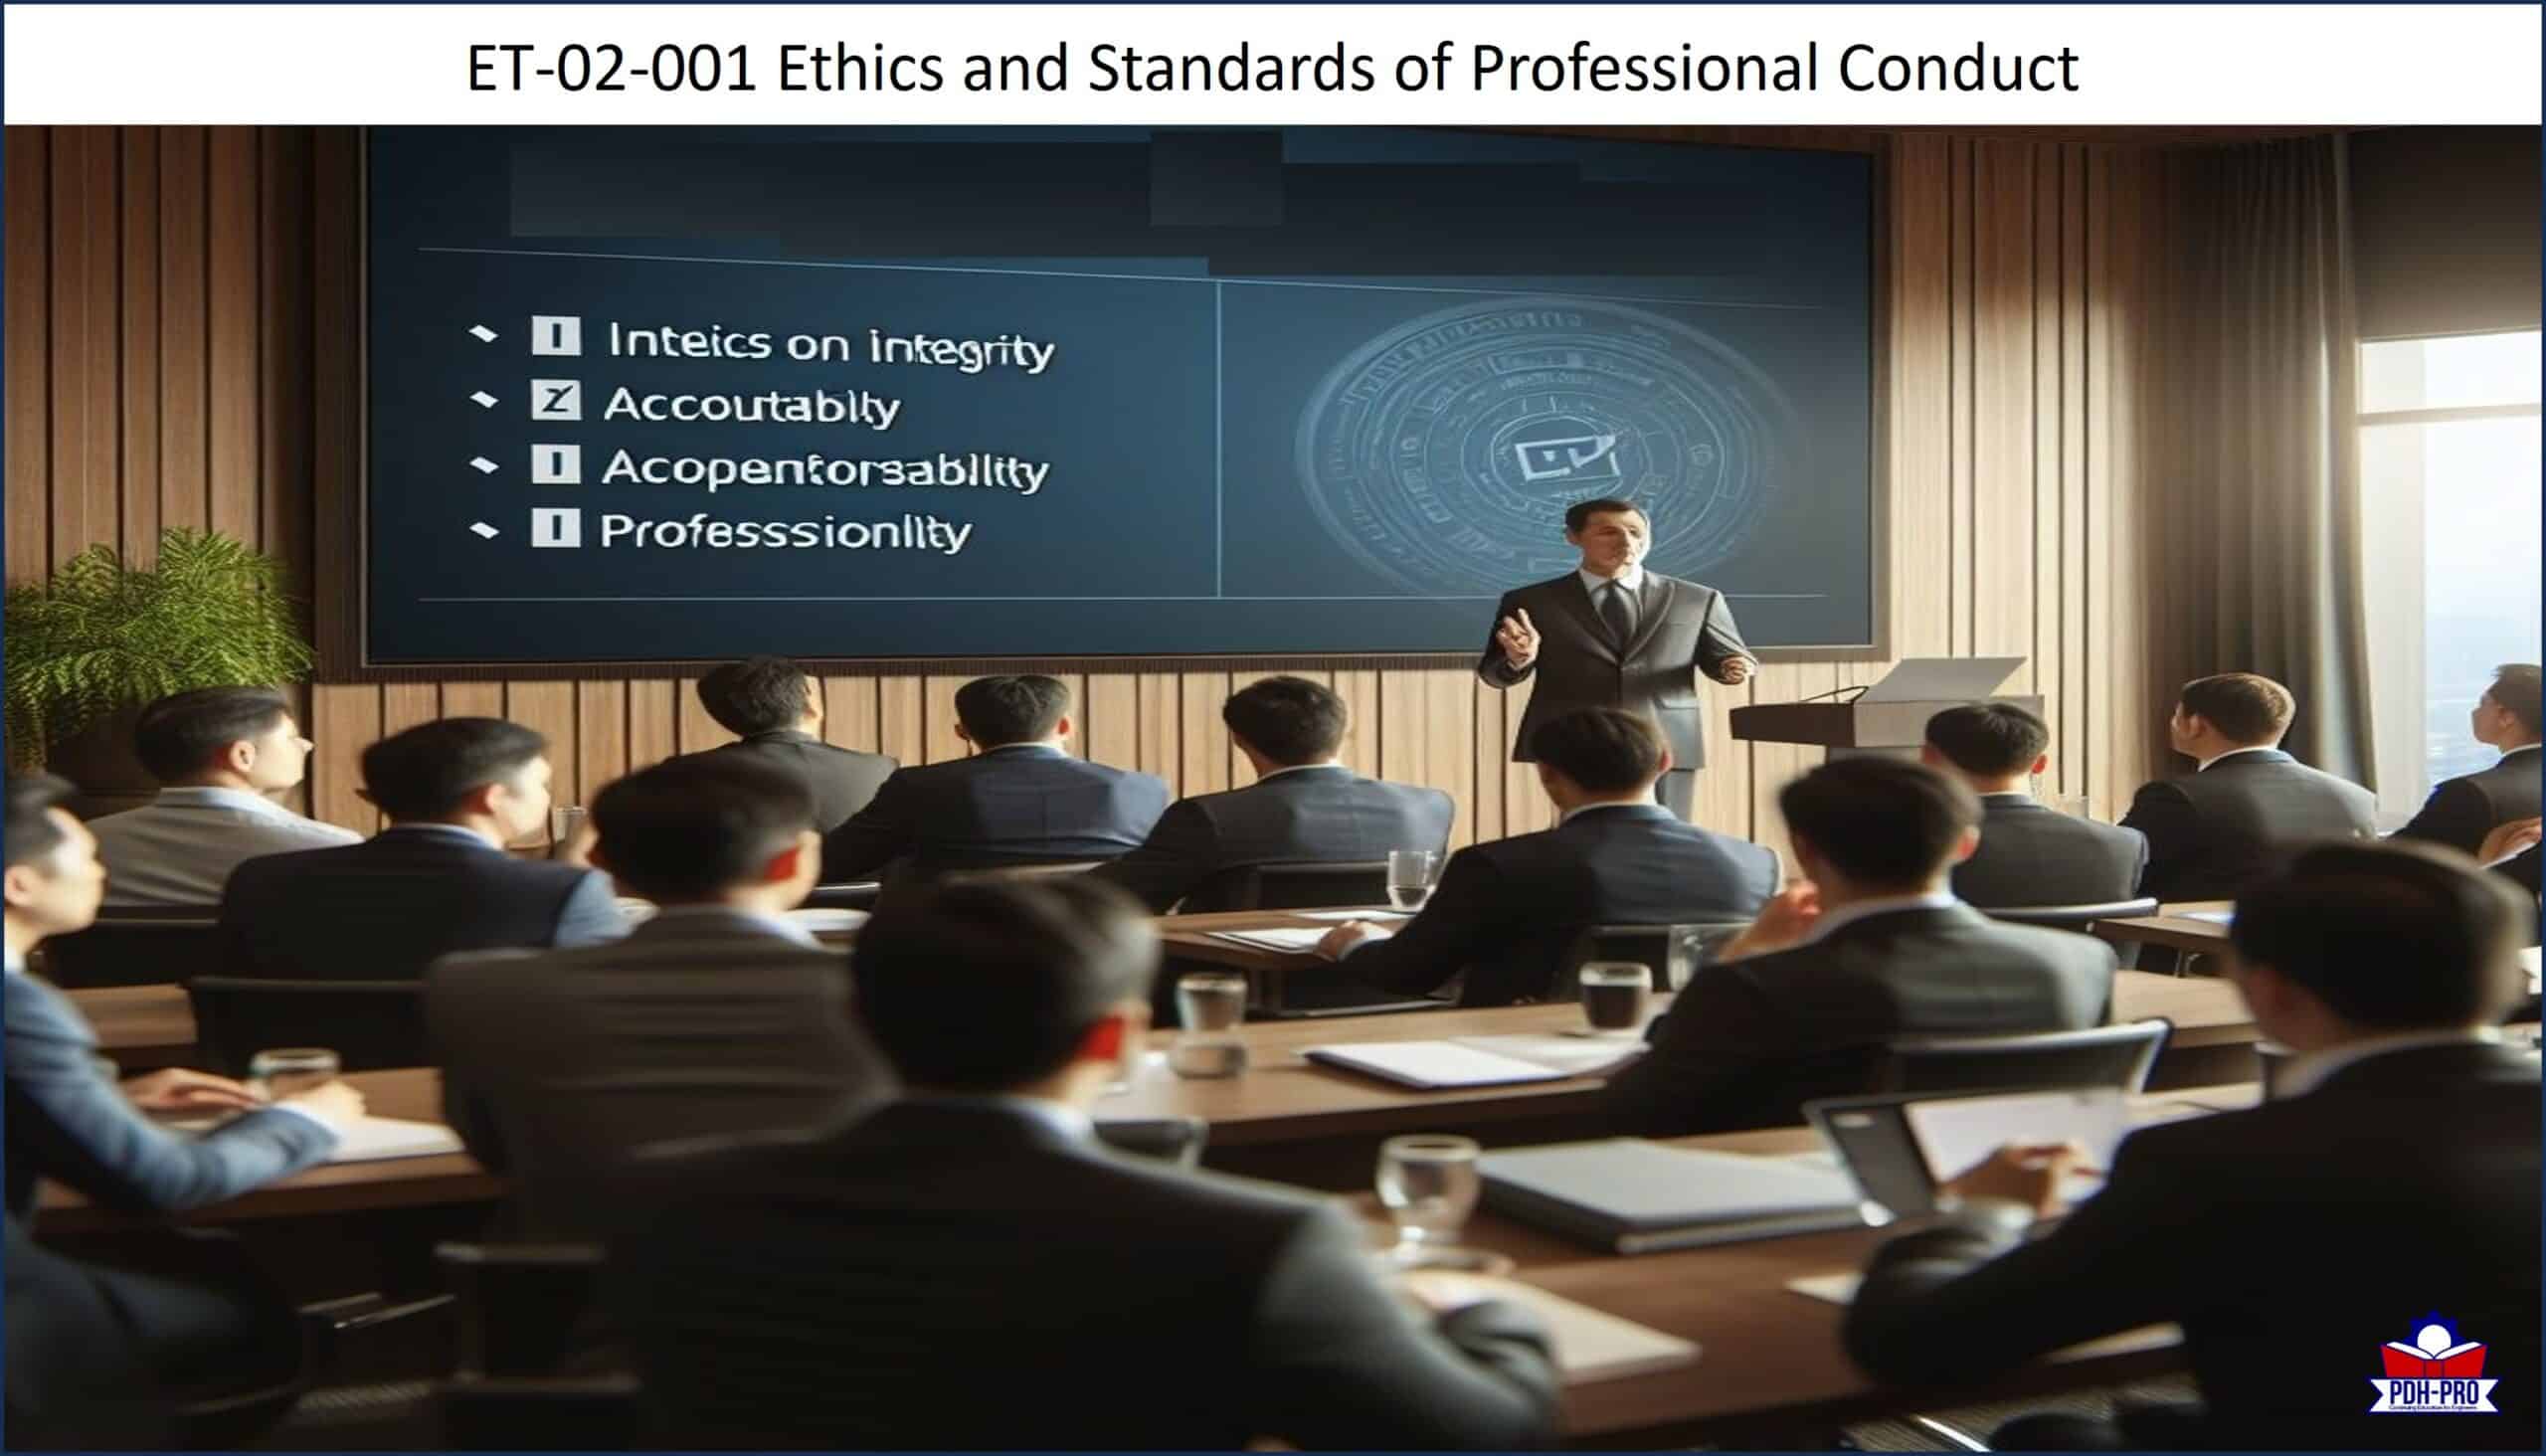 Ethics and Standards of Professional Conduct